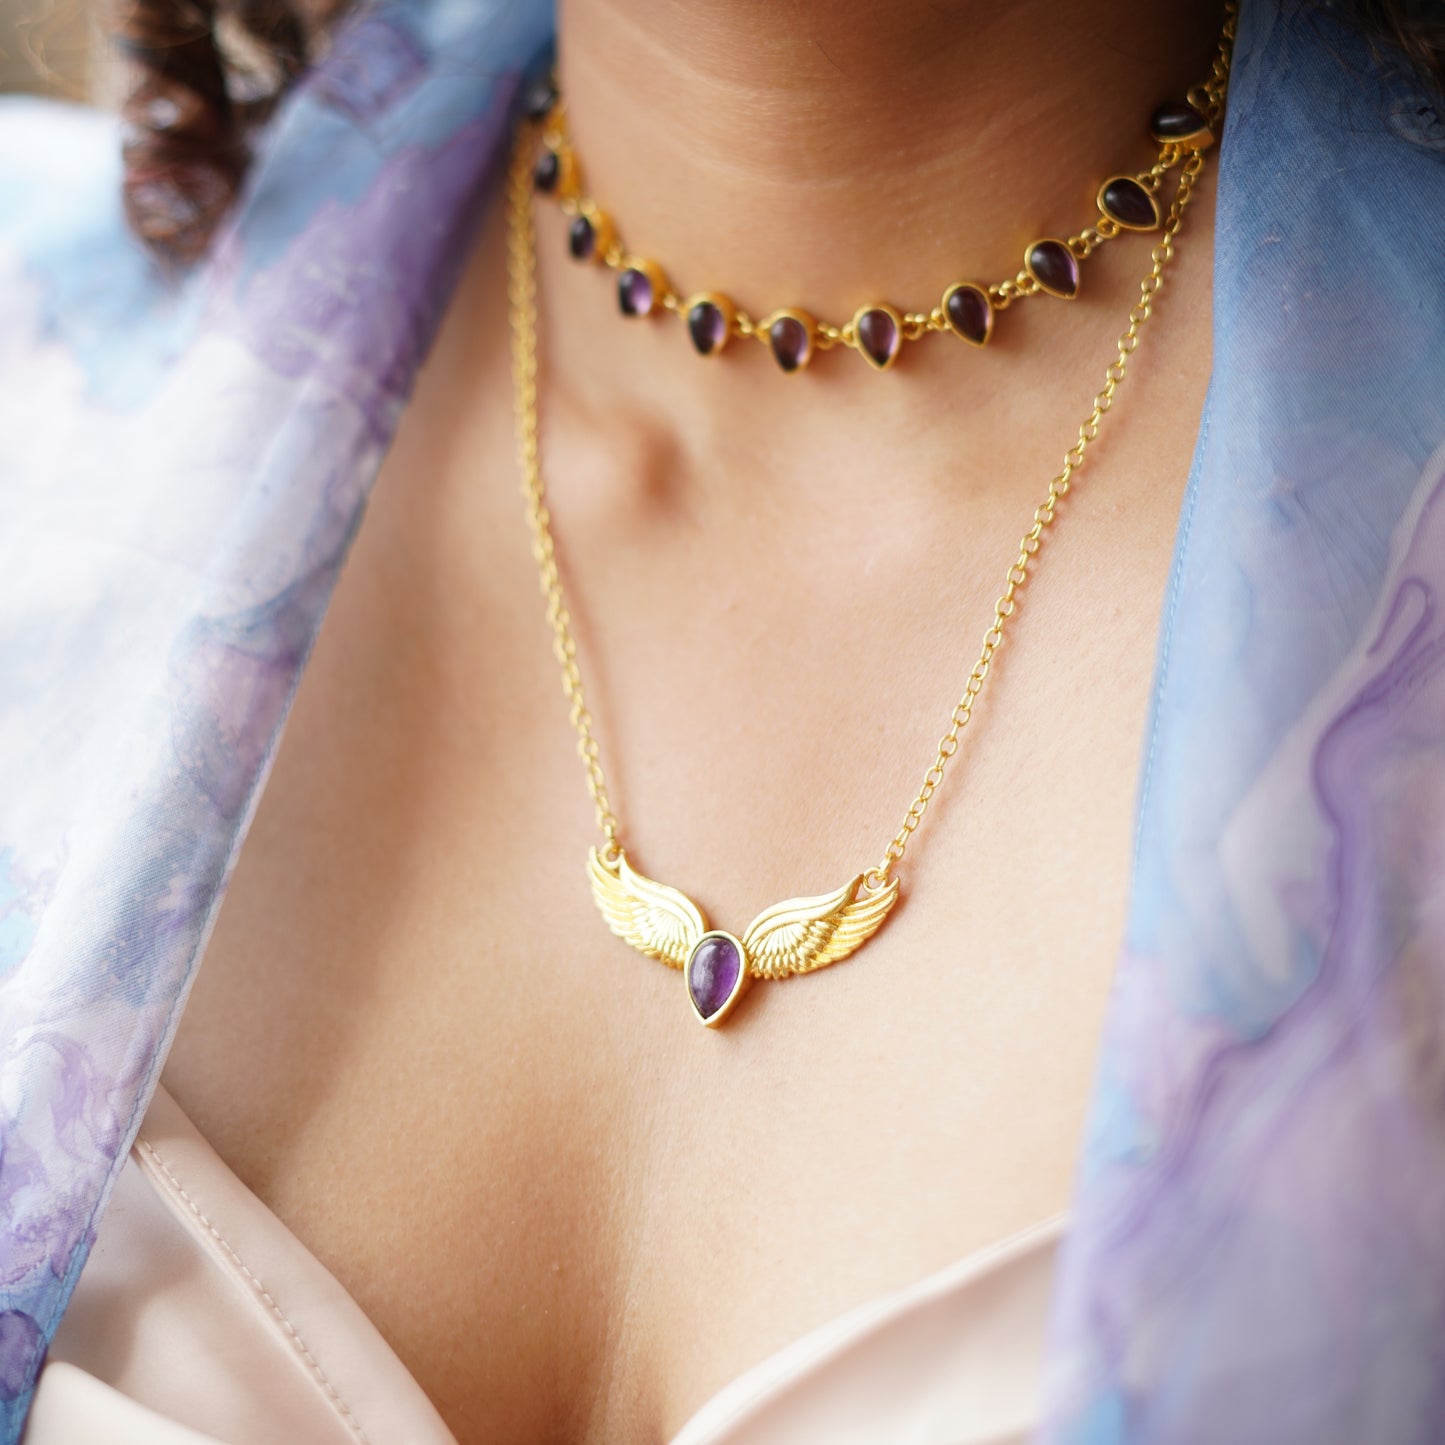 Jamun Wings necklace